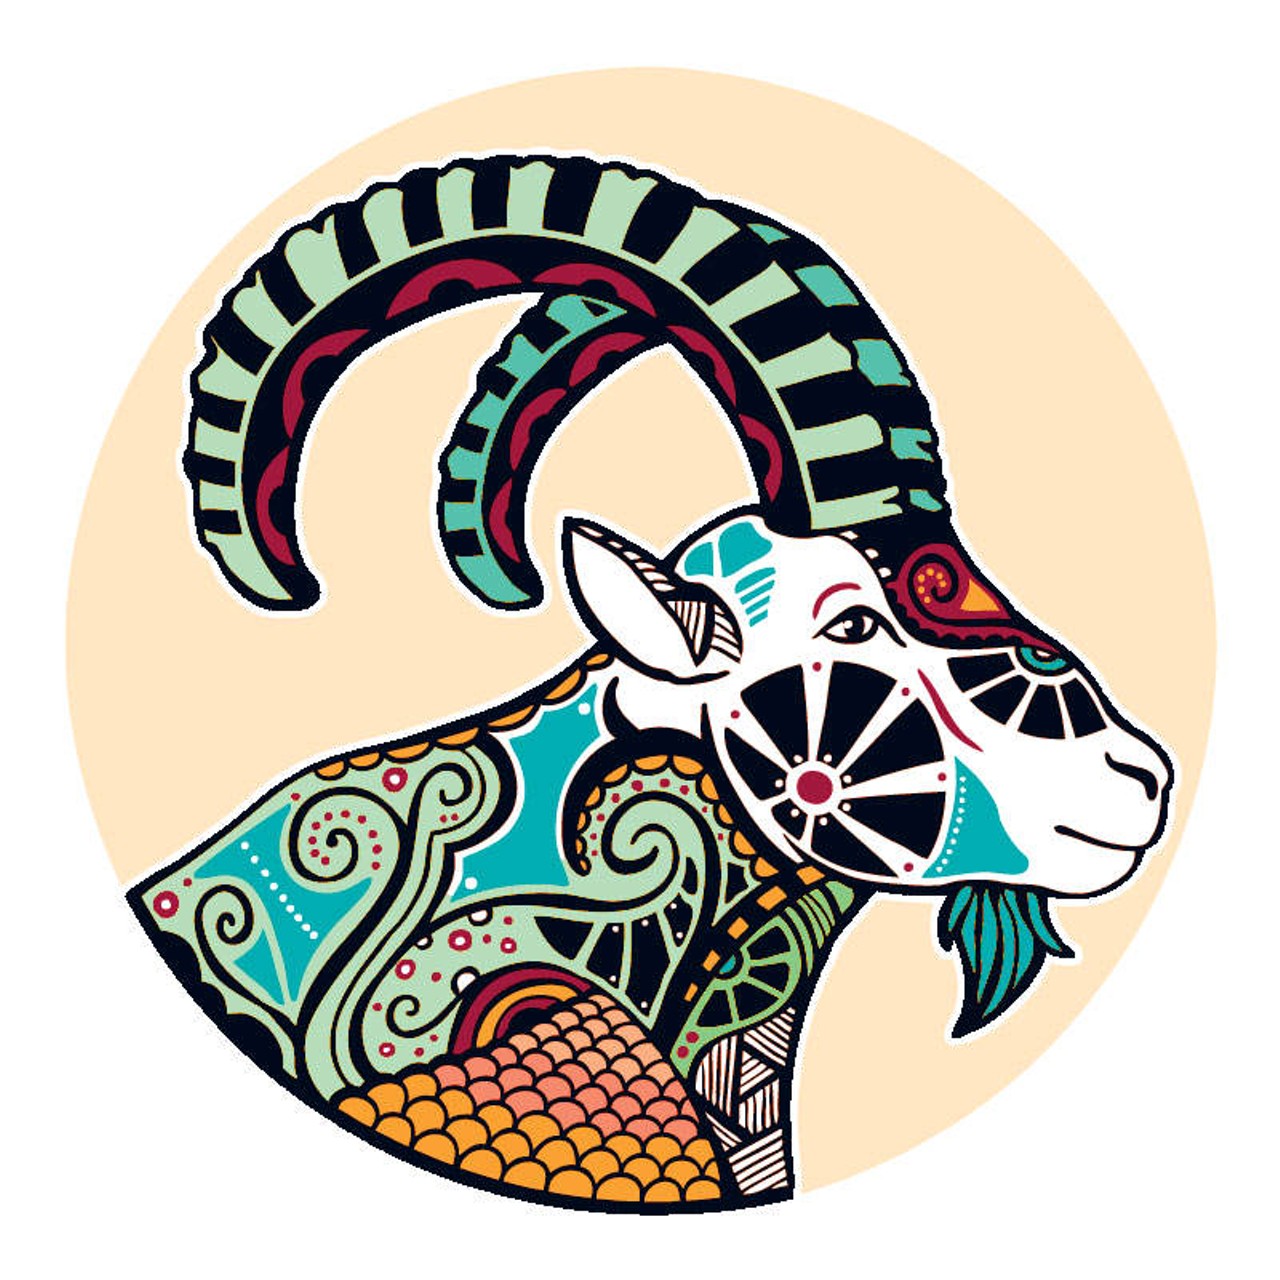 CAPRICORN (Dec. 21-Jan. 20): 
Scrambling around, going through whatever it takes to make the best of this, you are feeling strong enough to reckon with the fact that it&#146;s hard to stay on top of life when the internal piece is on shaky ground. The truth about things is on its way to the surface. There is no need to fear whatever it contains. The last four years are merging into a image that will show you what needs to happen now that you have been totally shaken down. At the bottom of this well, the heart of a new beginning beats in unison with the part of you that knows that you came here for this.